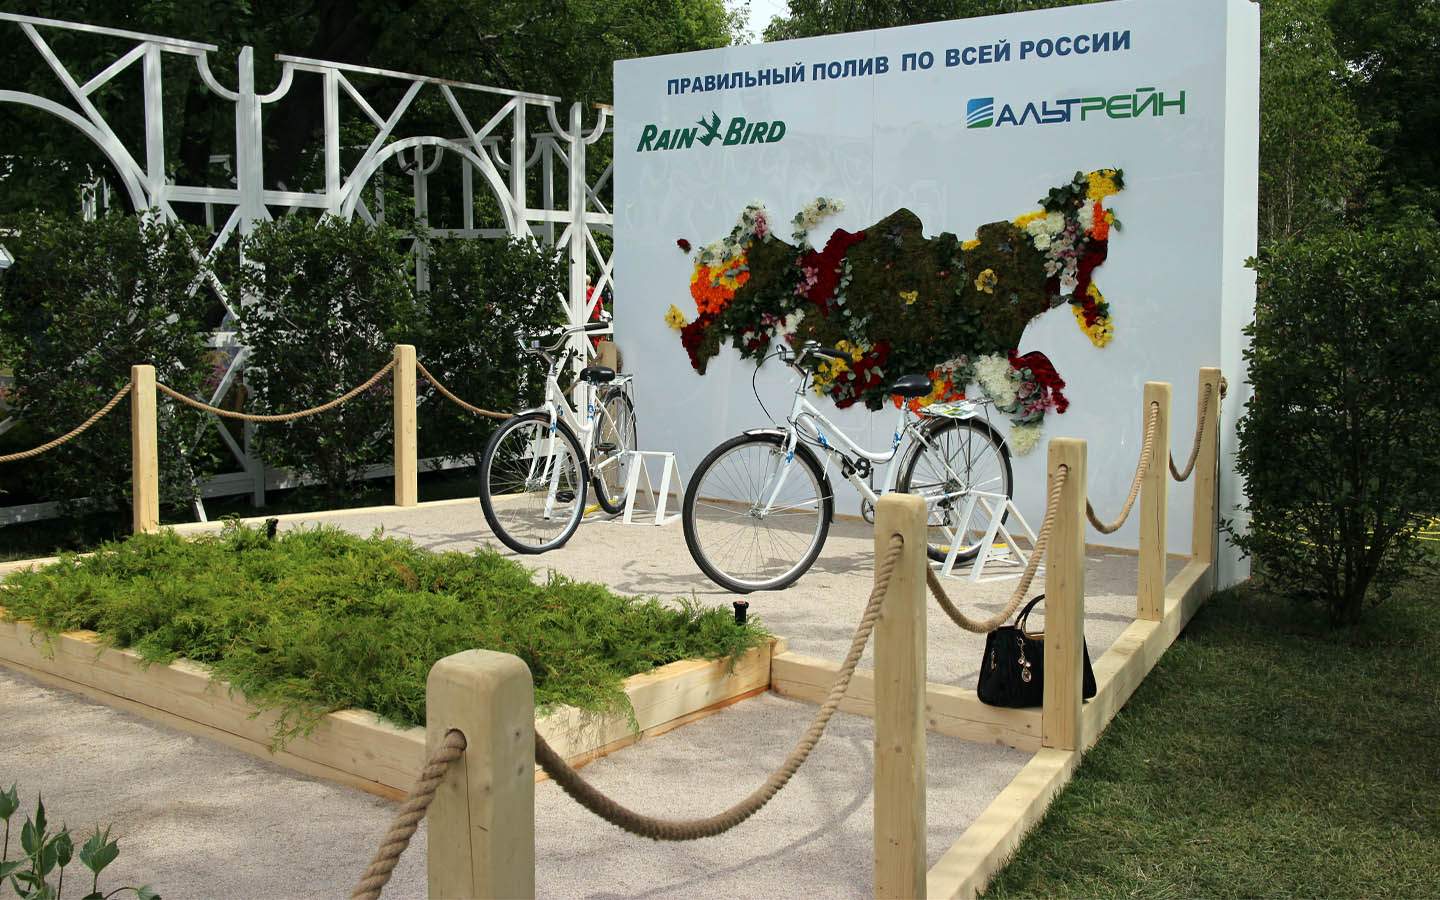 Moscow Flower Show 2017